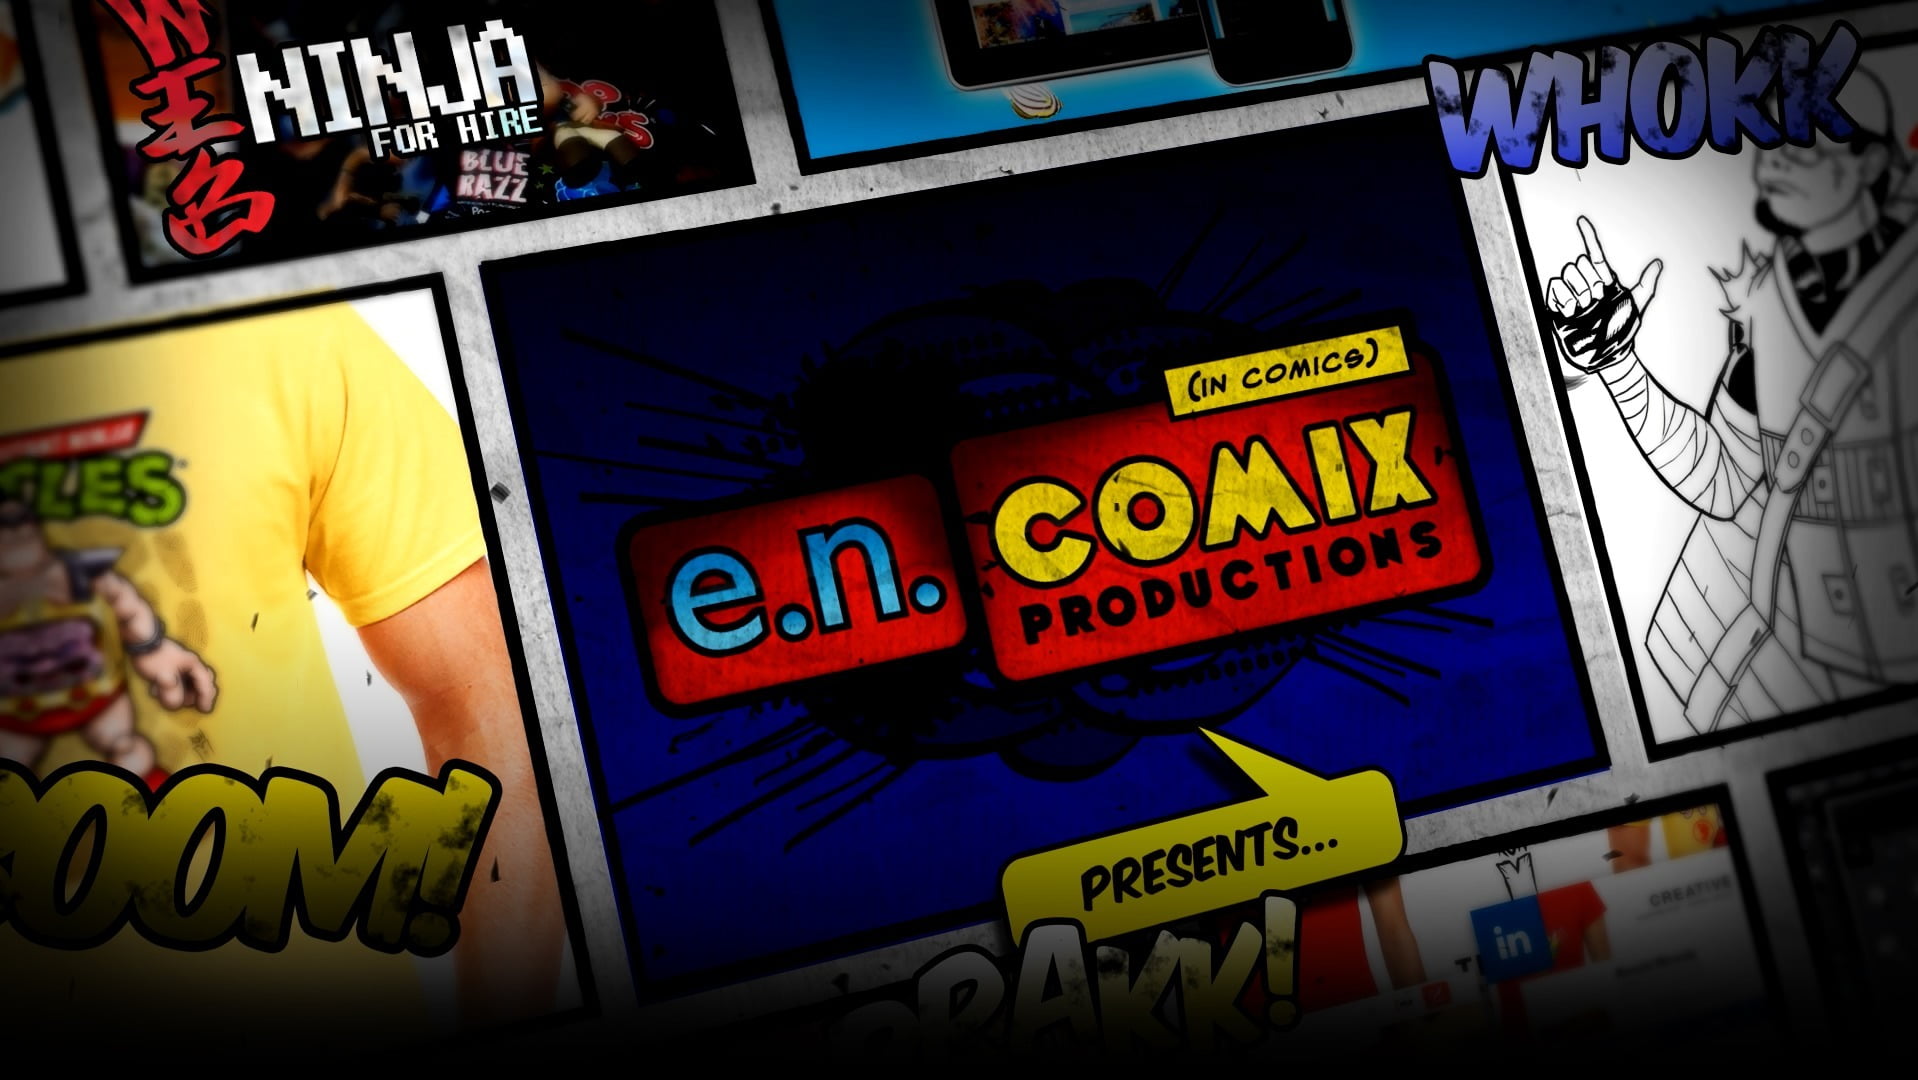 Welcome to e.n.comix productions | Homepage Welcome Text | Graphic, Print, Logo, and Website Design Solutions serving locally for Tempe Arizona and Phoenix Valley Cities